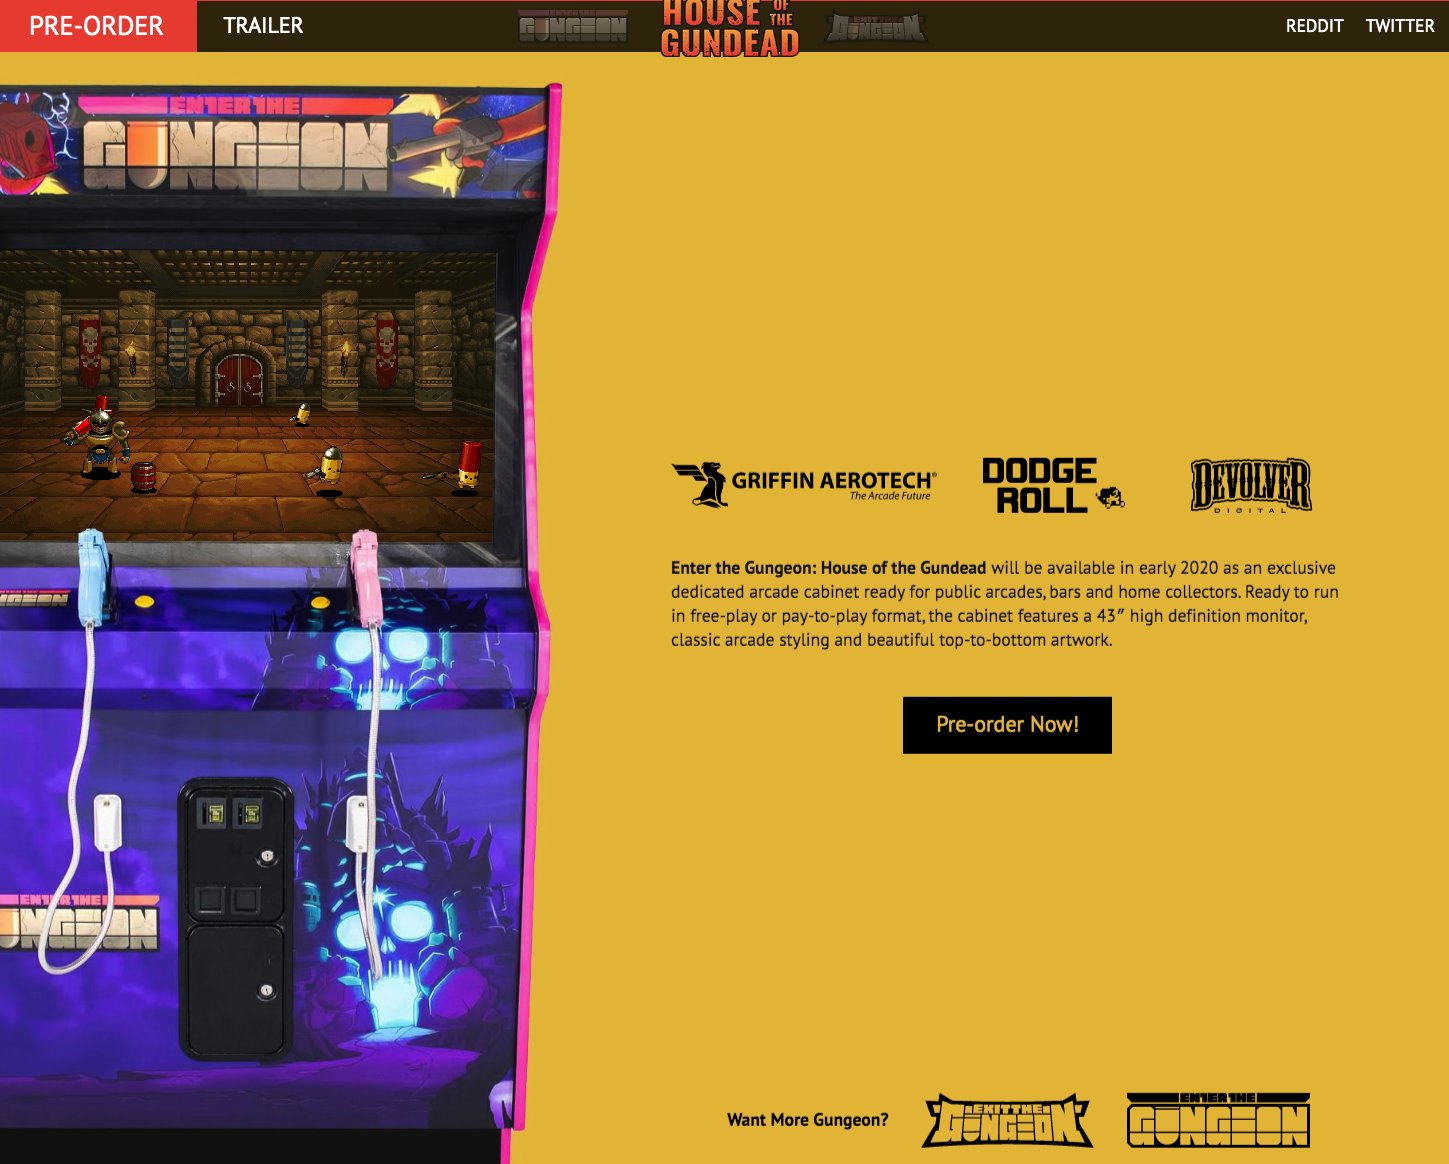 Enter Exit The Gungeon Crawl Through The New Gungeon Verse Website Housing Enter The Gungeon Exit The Gungeon And The Upcoming Arcade Game House Of The Gundead T Co Ahdrfzuvxw T Co Tfrrlay7lz Twitter